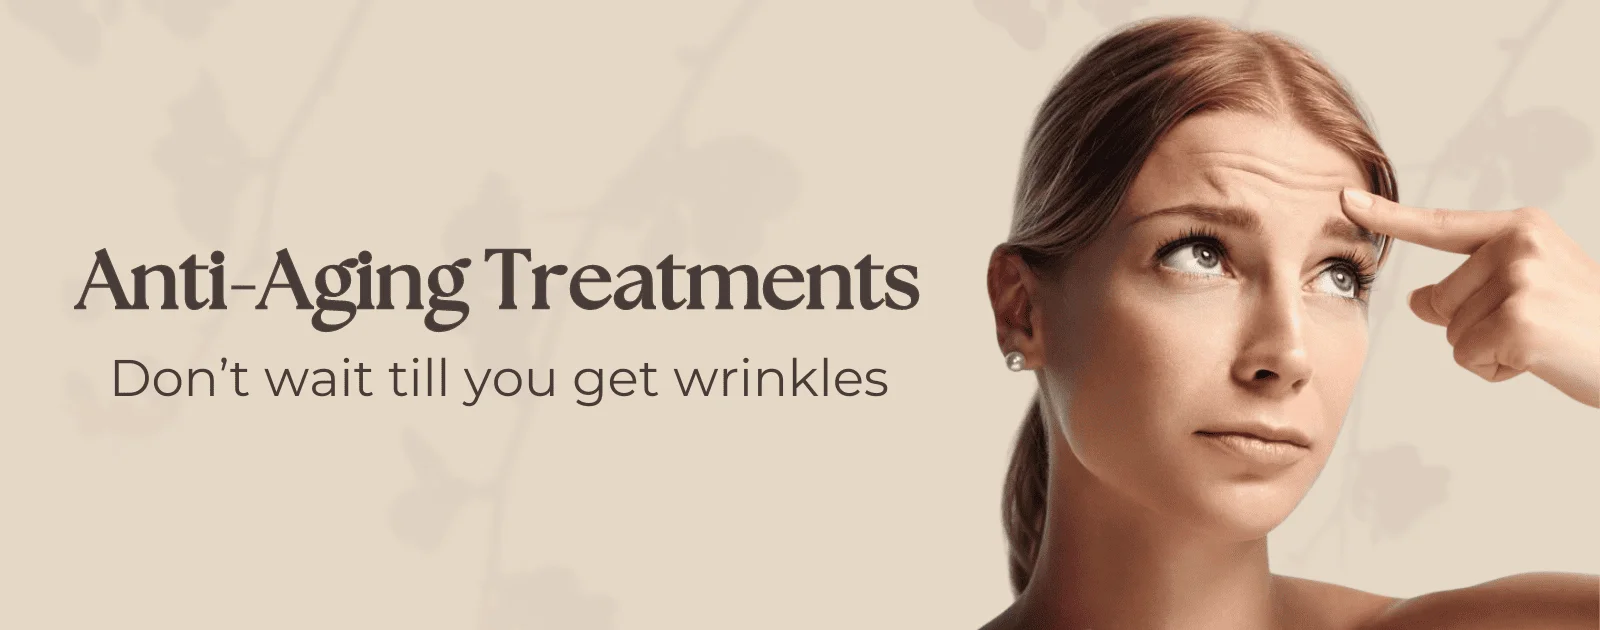 Anti-Aging Treatments Don't wait till you get wrinkles